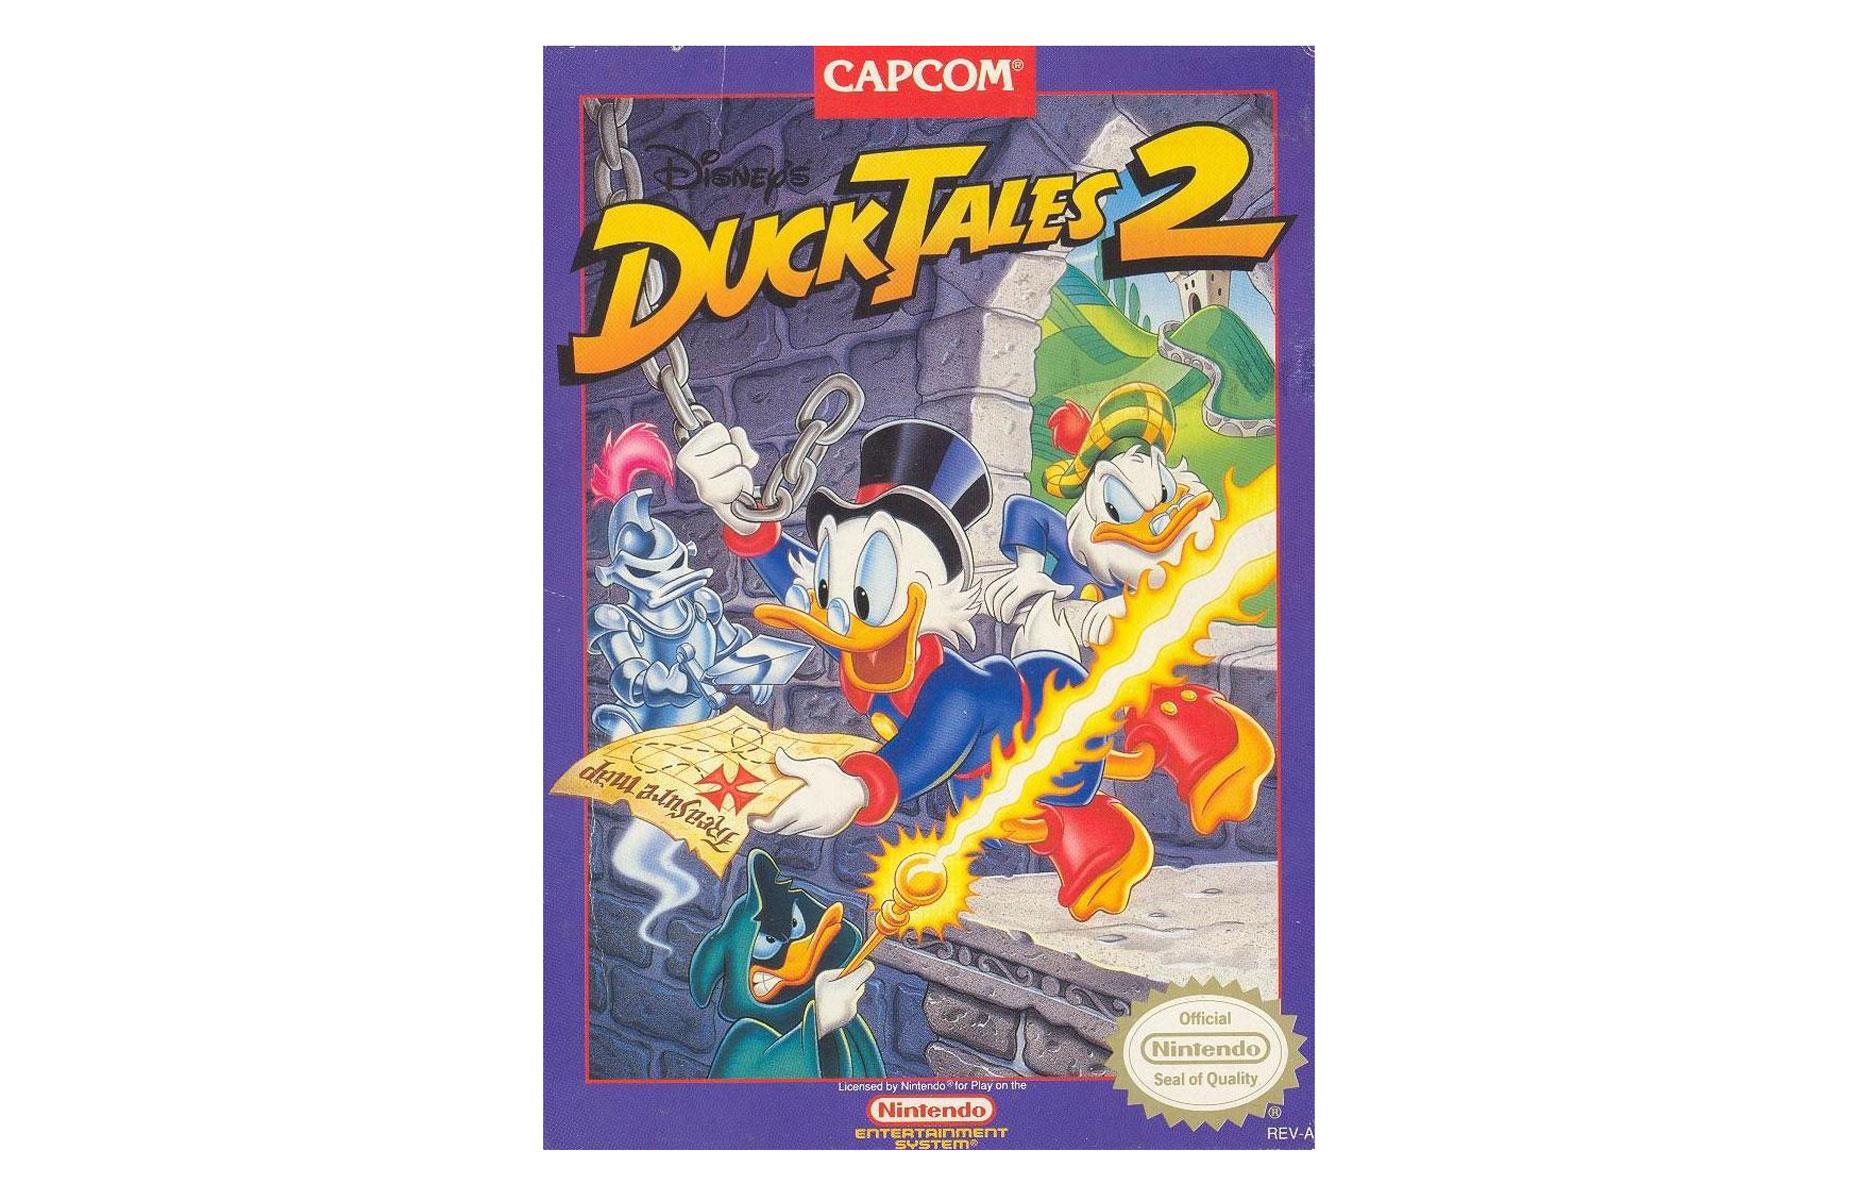 Capcom DuckTales 2 NES game: up to $600 (£465)